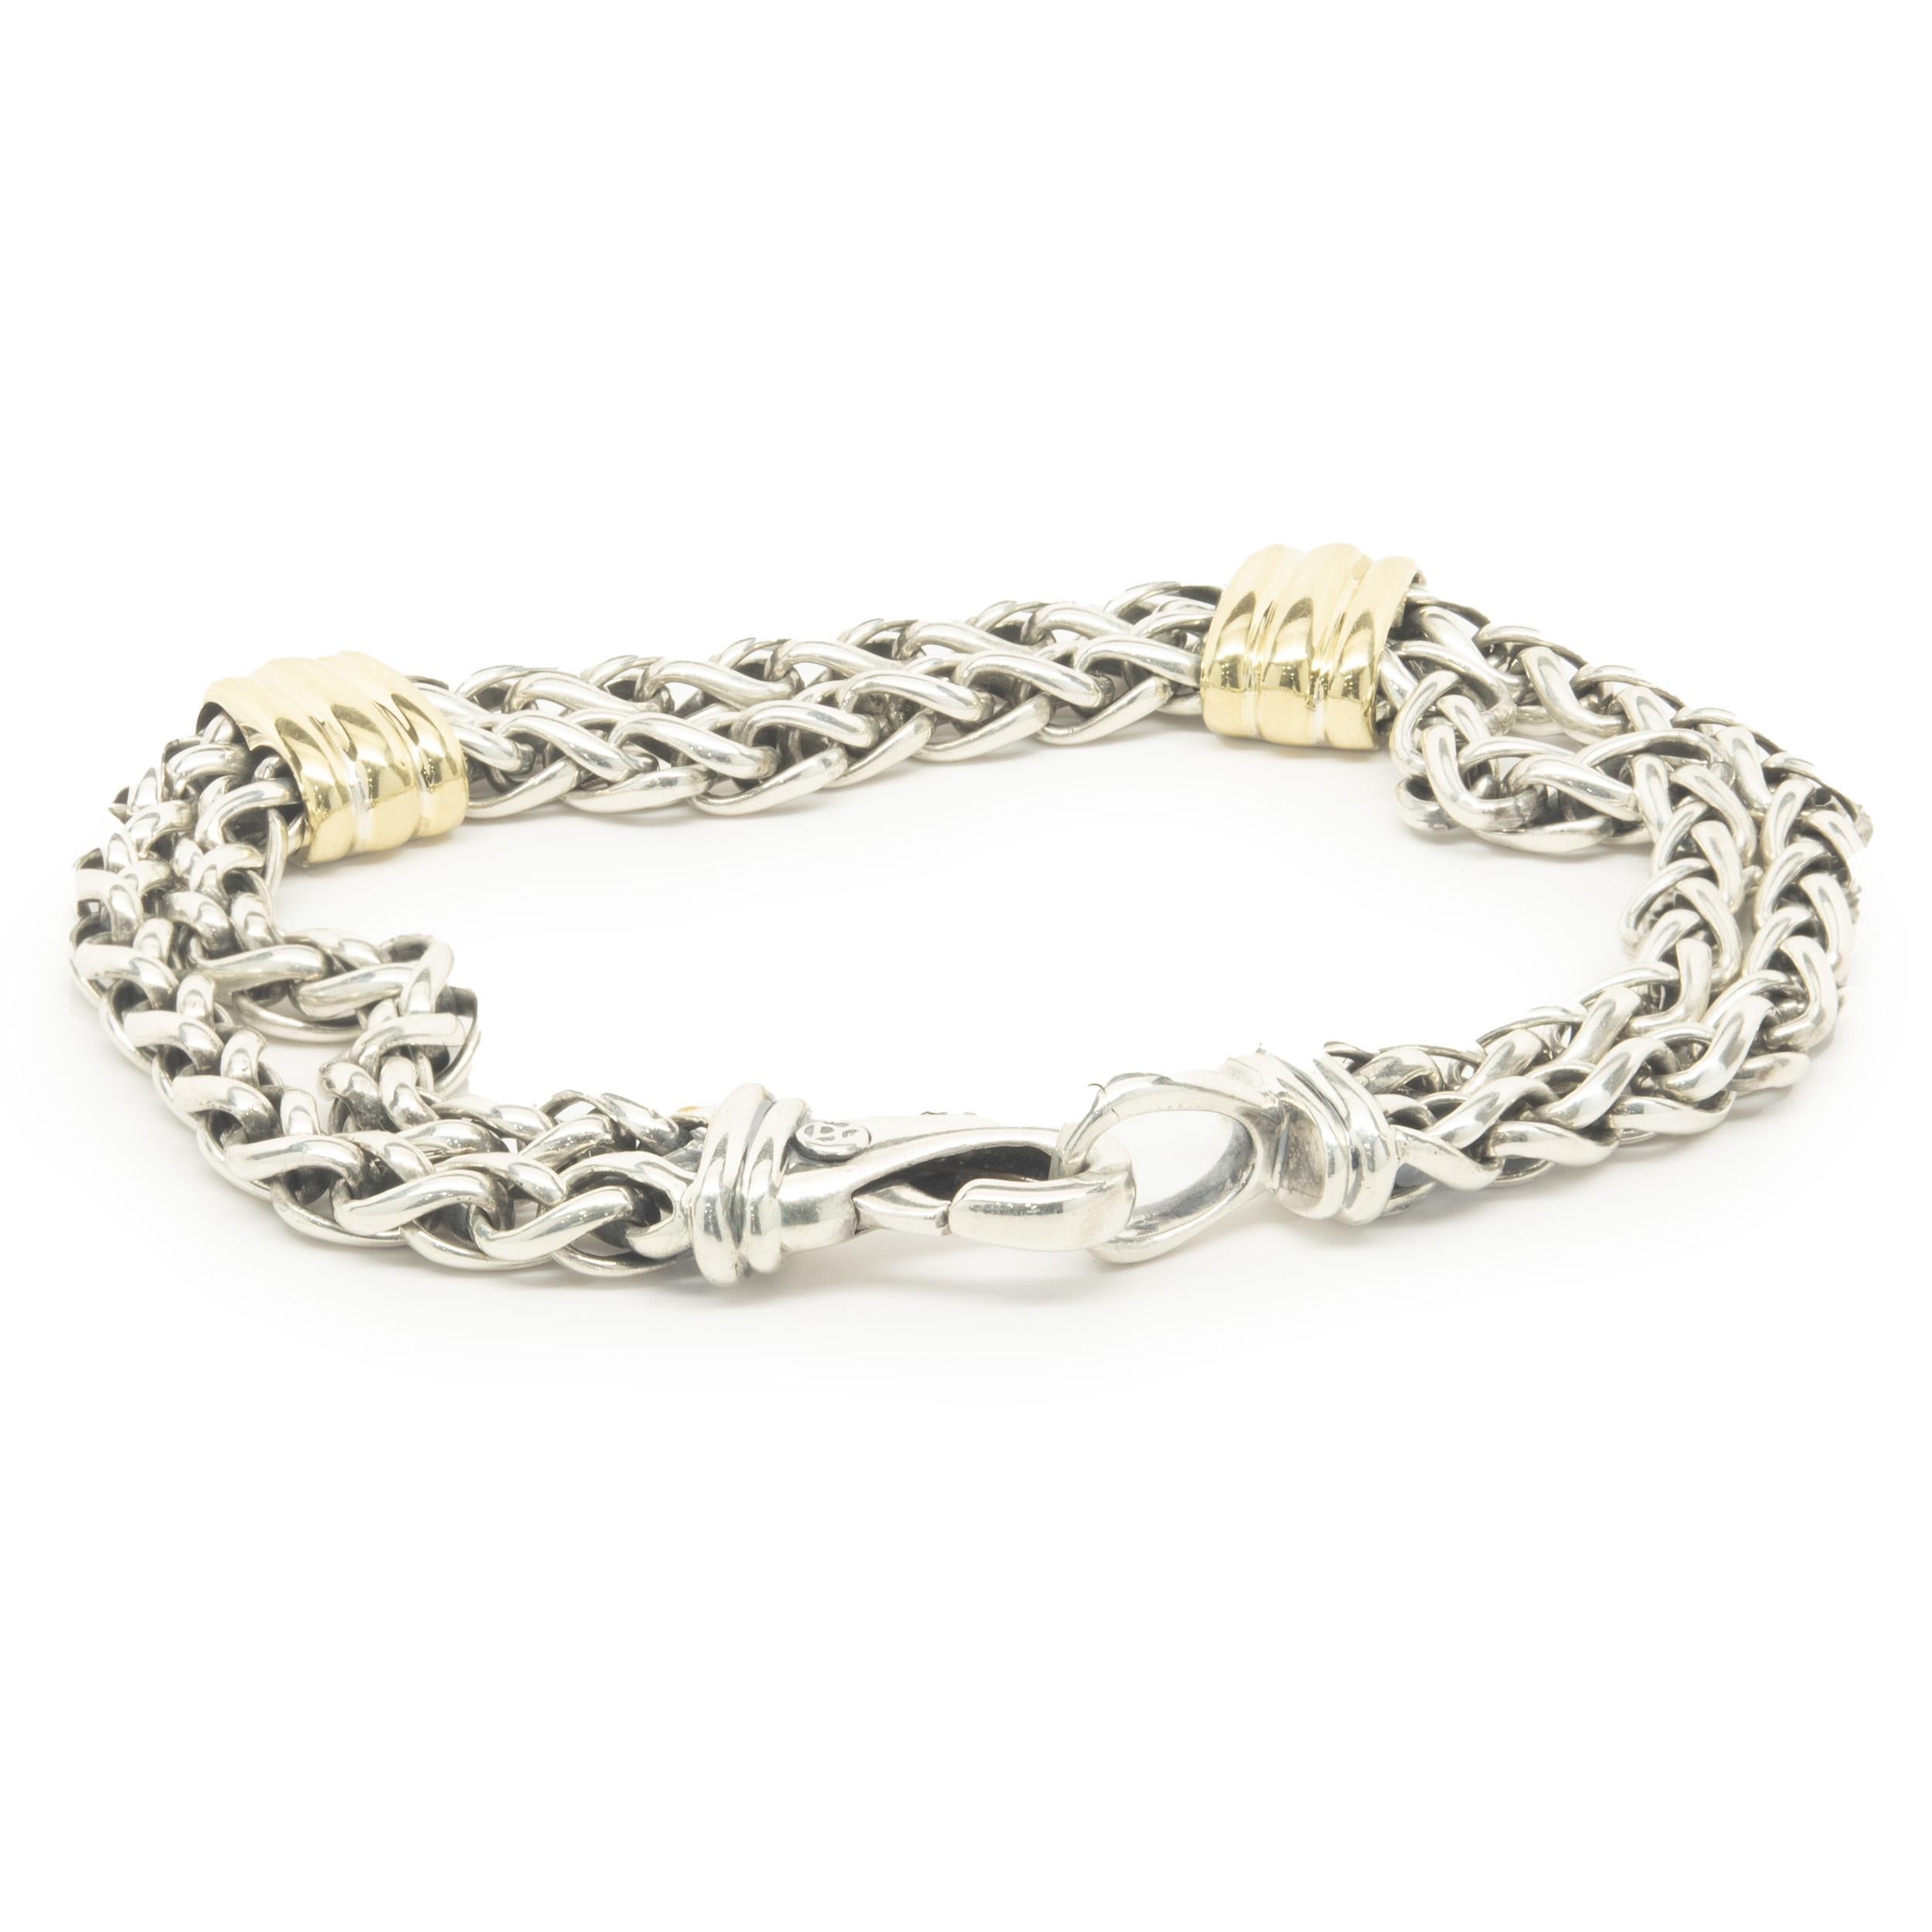 Designer: David Yurman
Material: Sterling Silver / 18K yellow gold
Dimensions: bracelet will fit up to a 8.5-inch wrist
Weight: 42.05 grams
